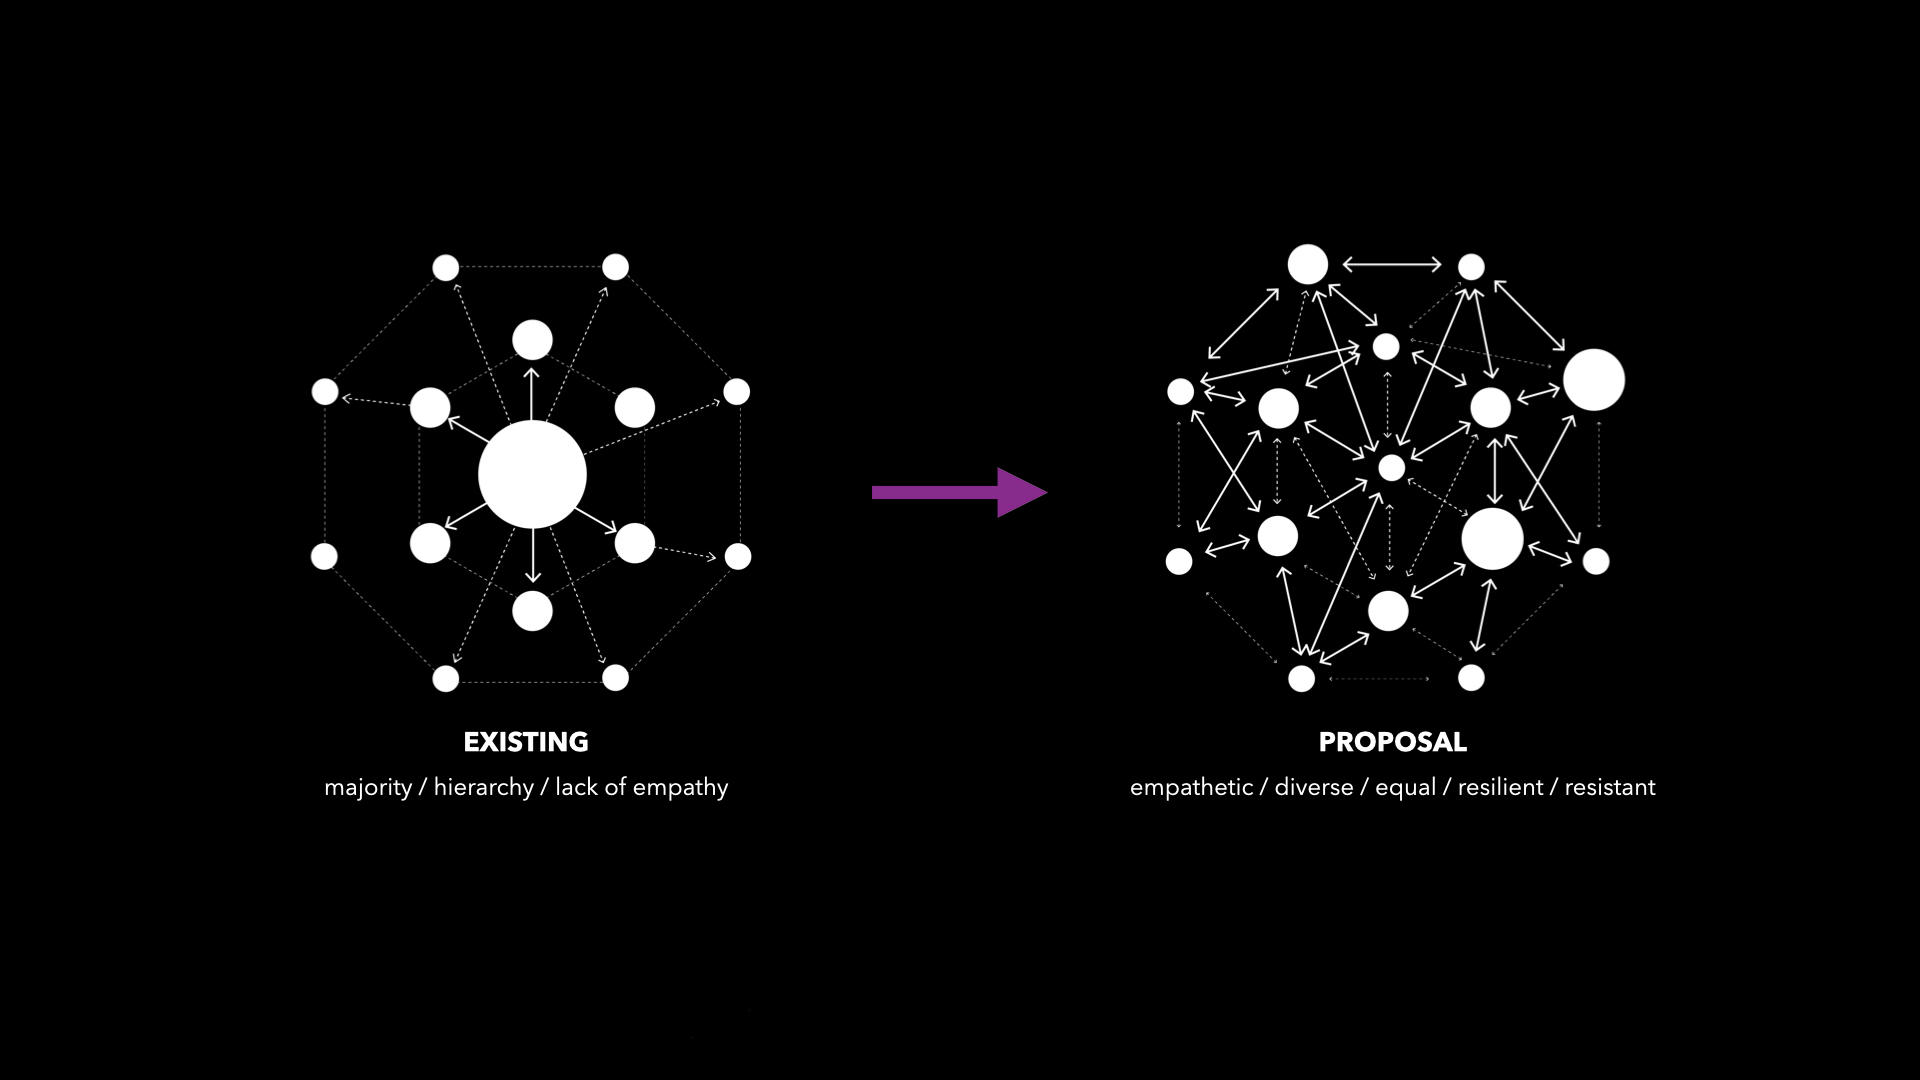 This diagram illustrates the existing and proposed relationships of information flow in human society.